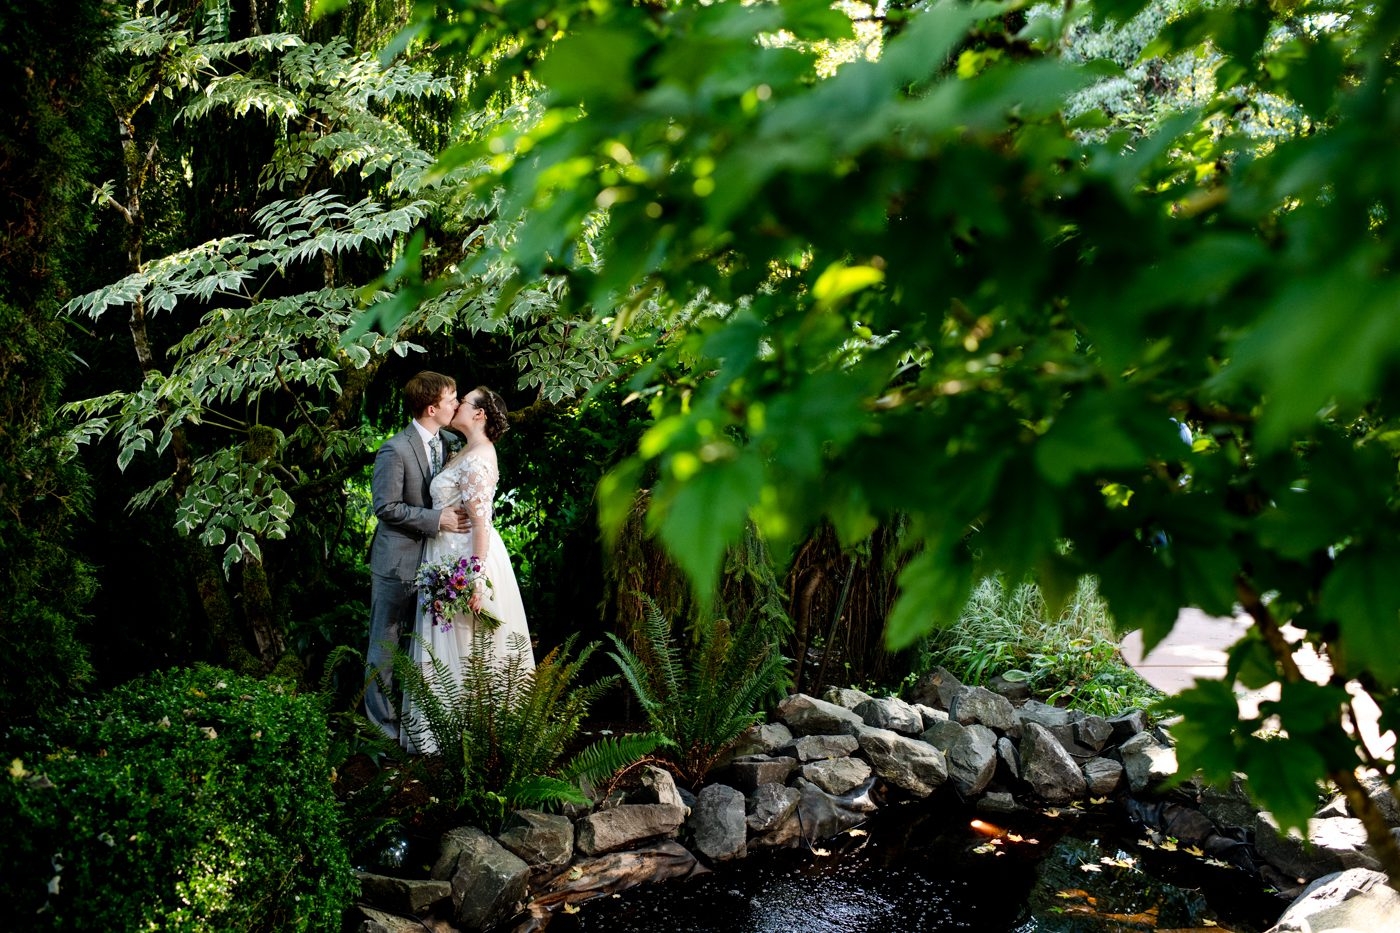 Newlyweds-surrounded-by-green-foliage